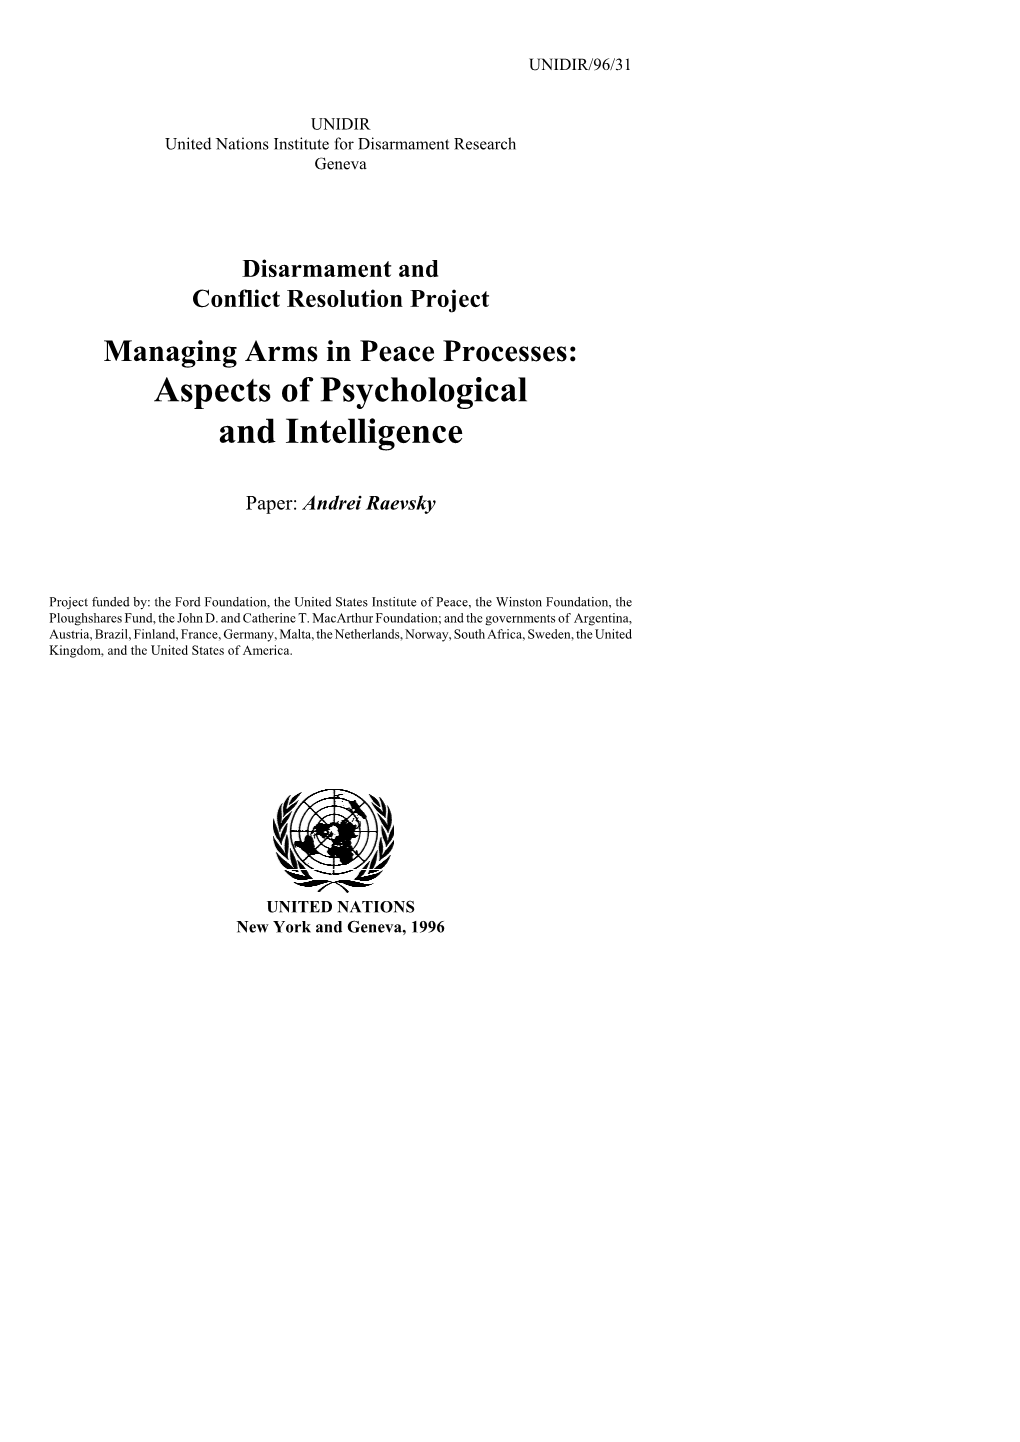 Managing Arms in Peace Processes: Aspects of Psychological and Intelligence